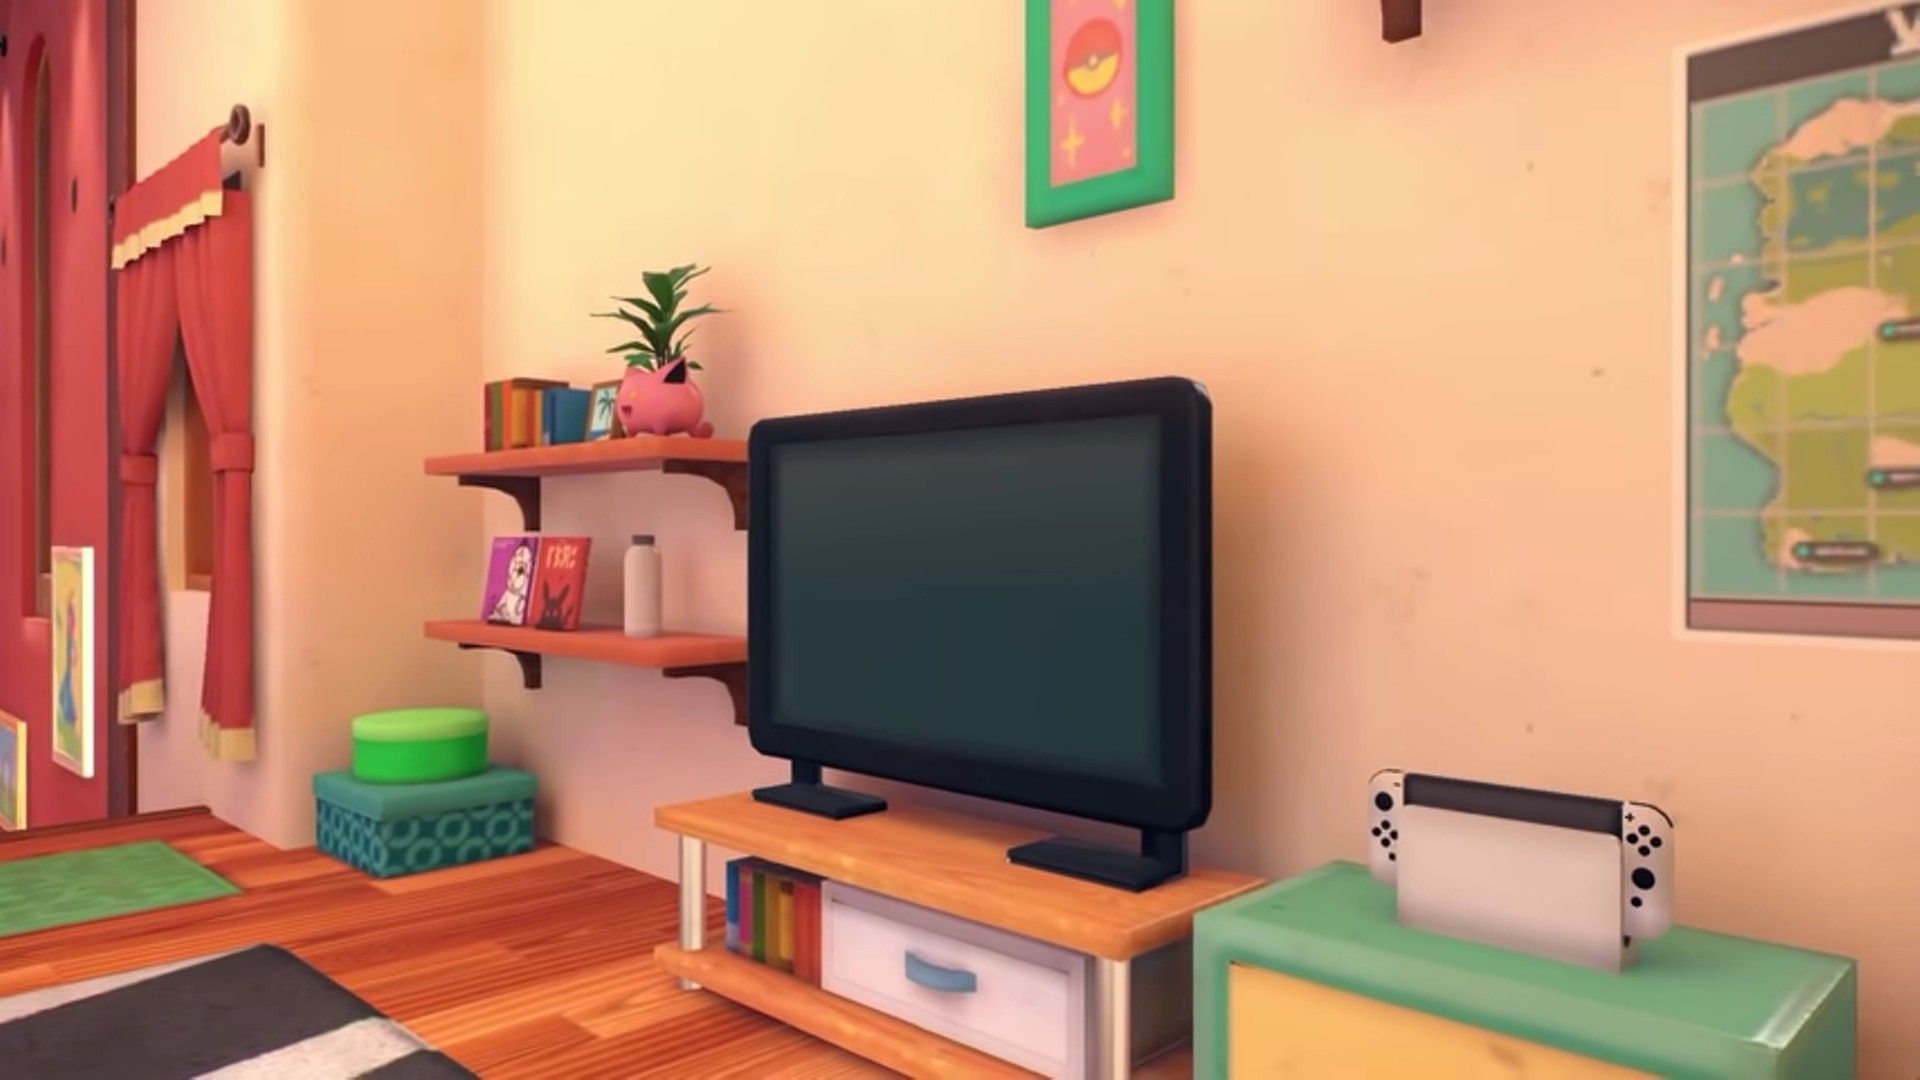 Screenshot of Pokemon Scarlet & Violet showing the interior of players home, a TV, an OLED Ninendo Switch and a corner of the world map on the wall